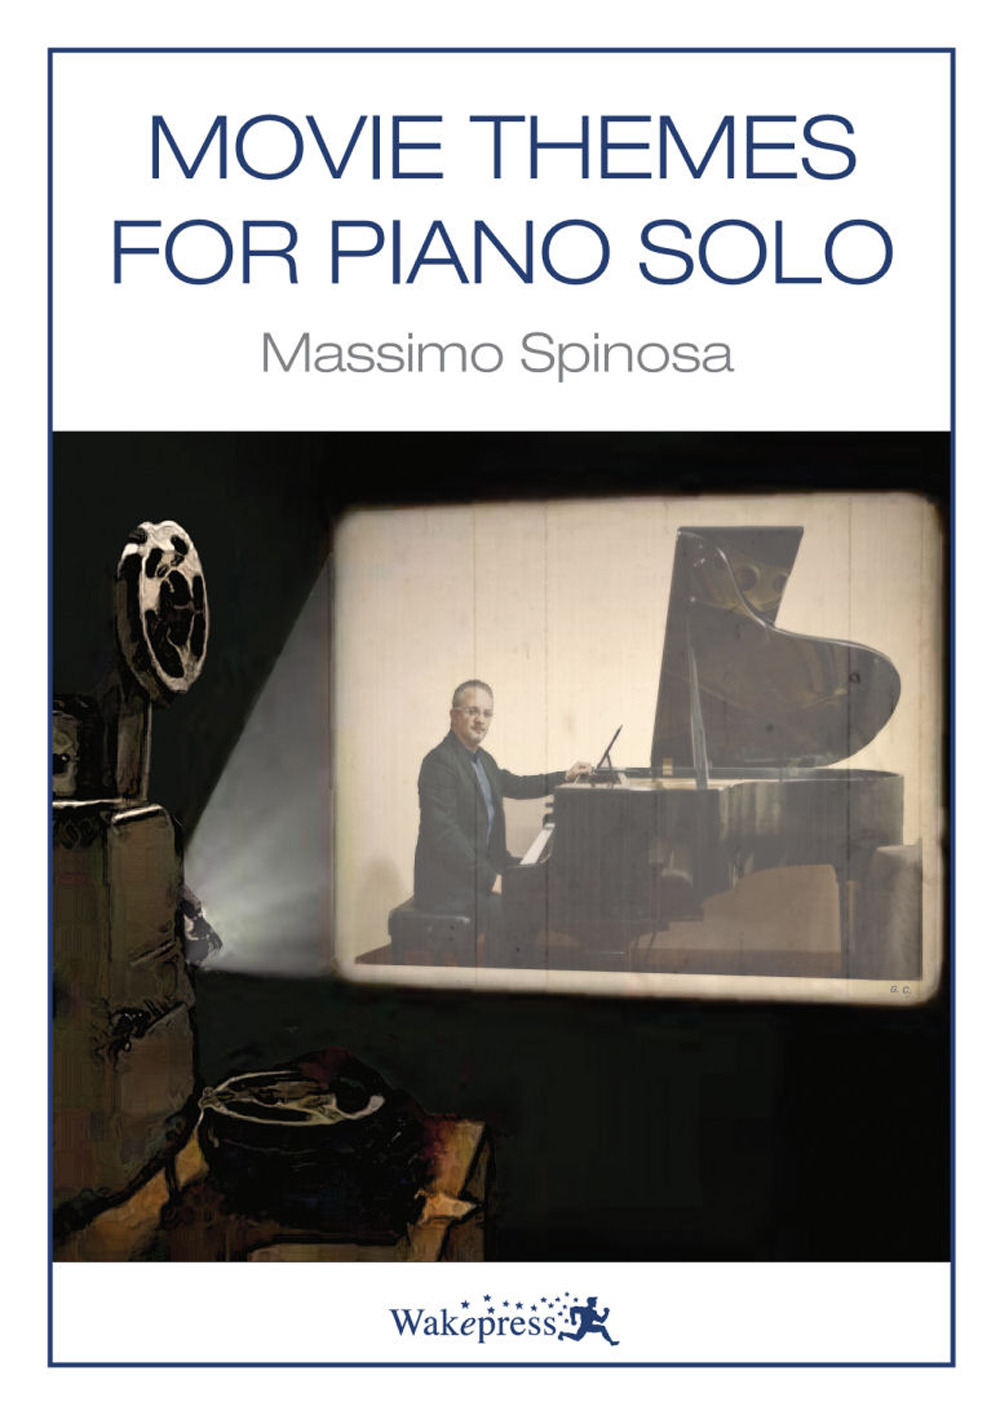 Movie themes for piano solo